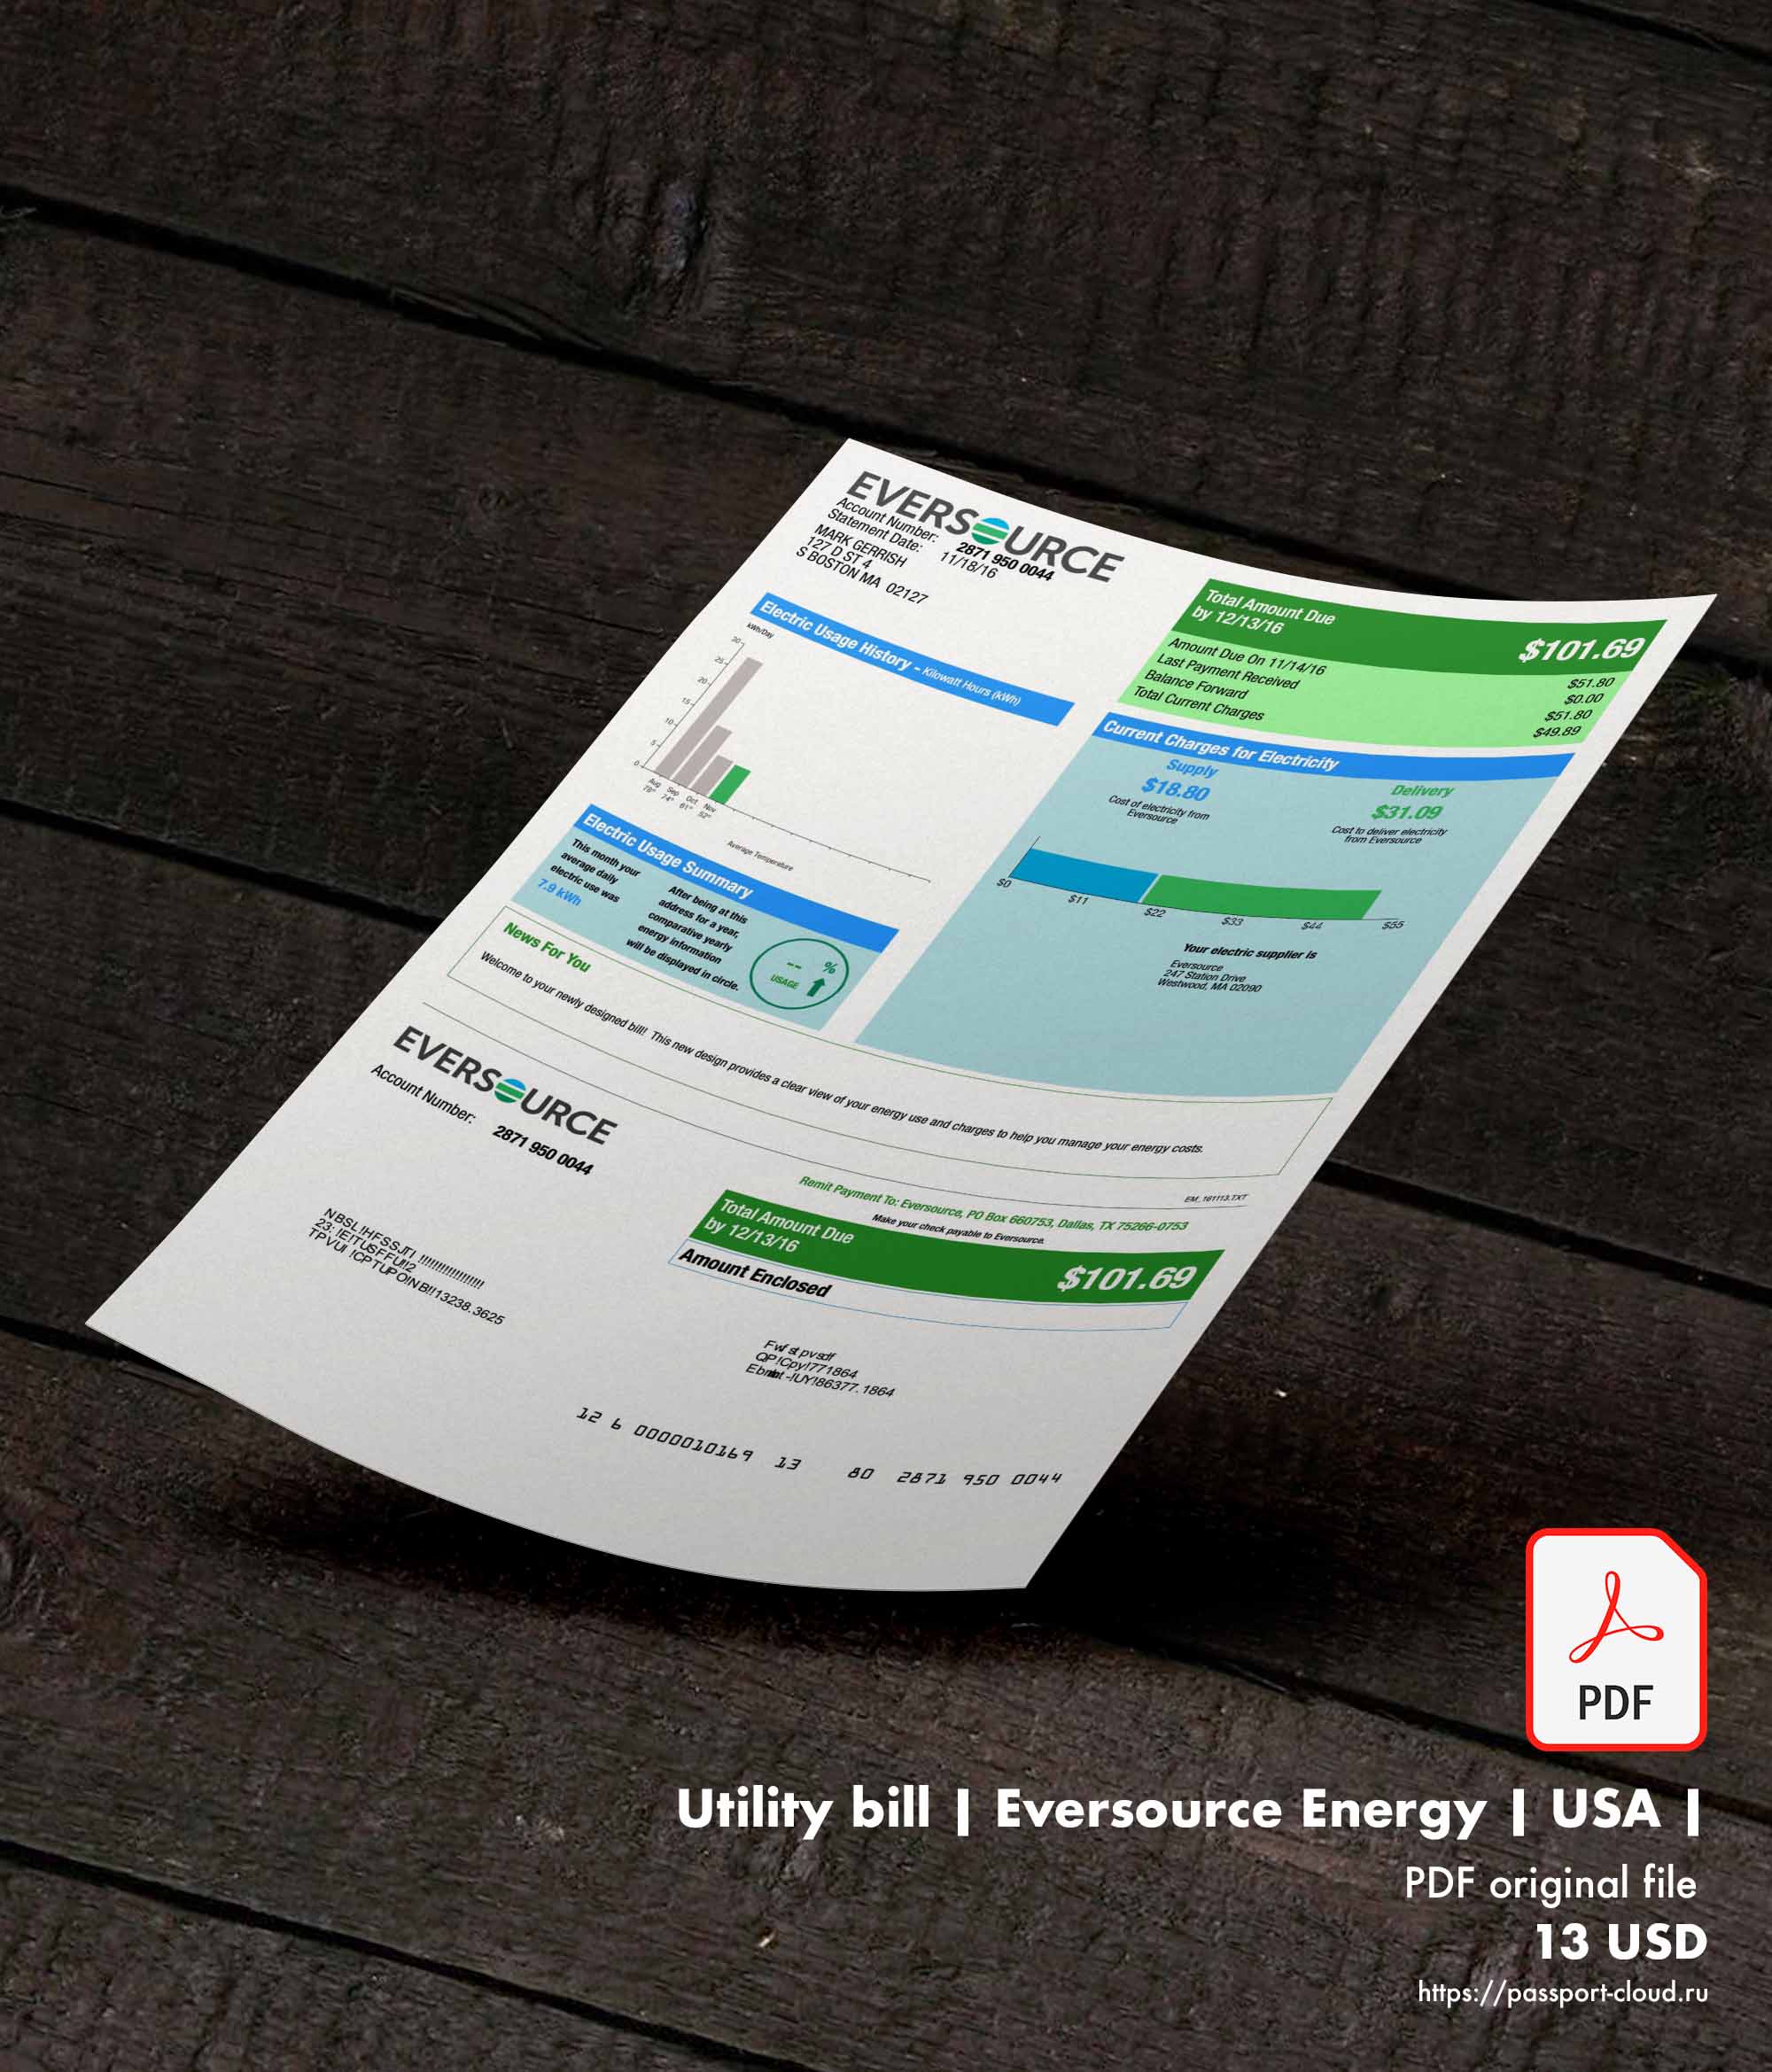 Utility bill | Eversource Energy | USA |1